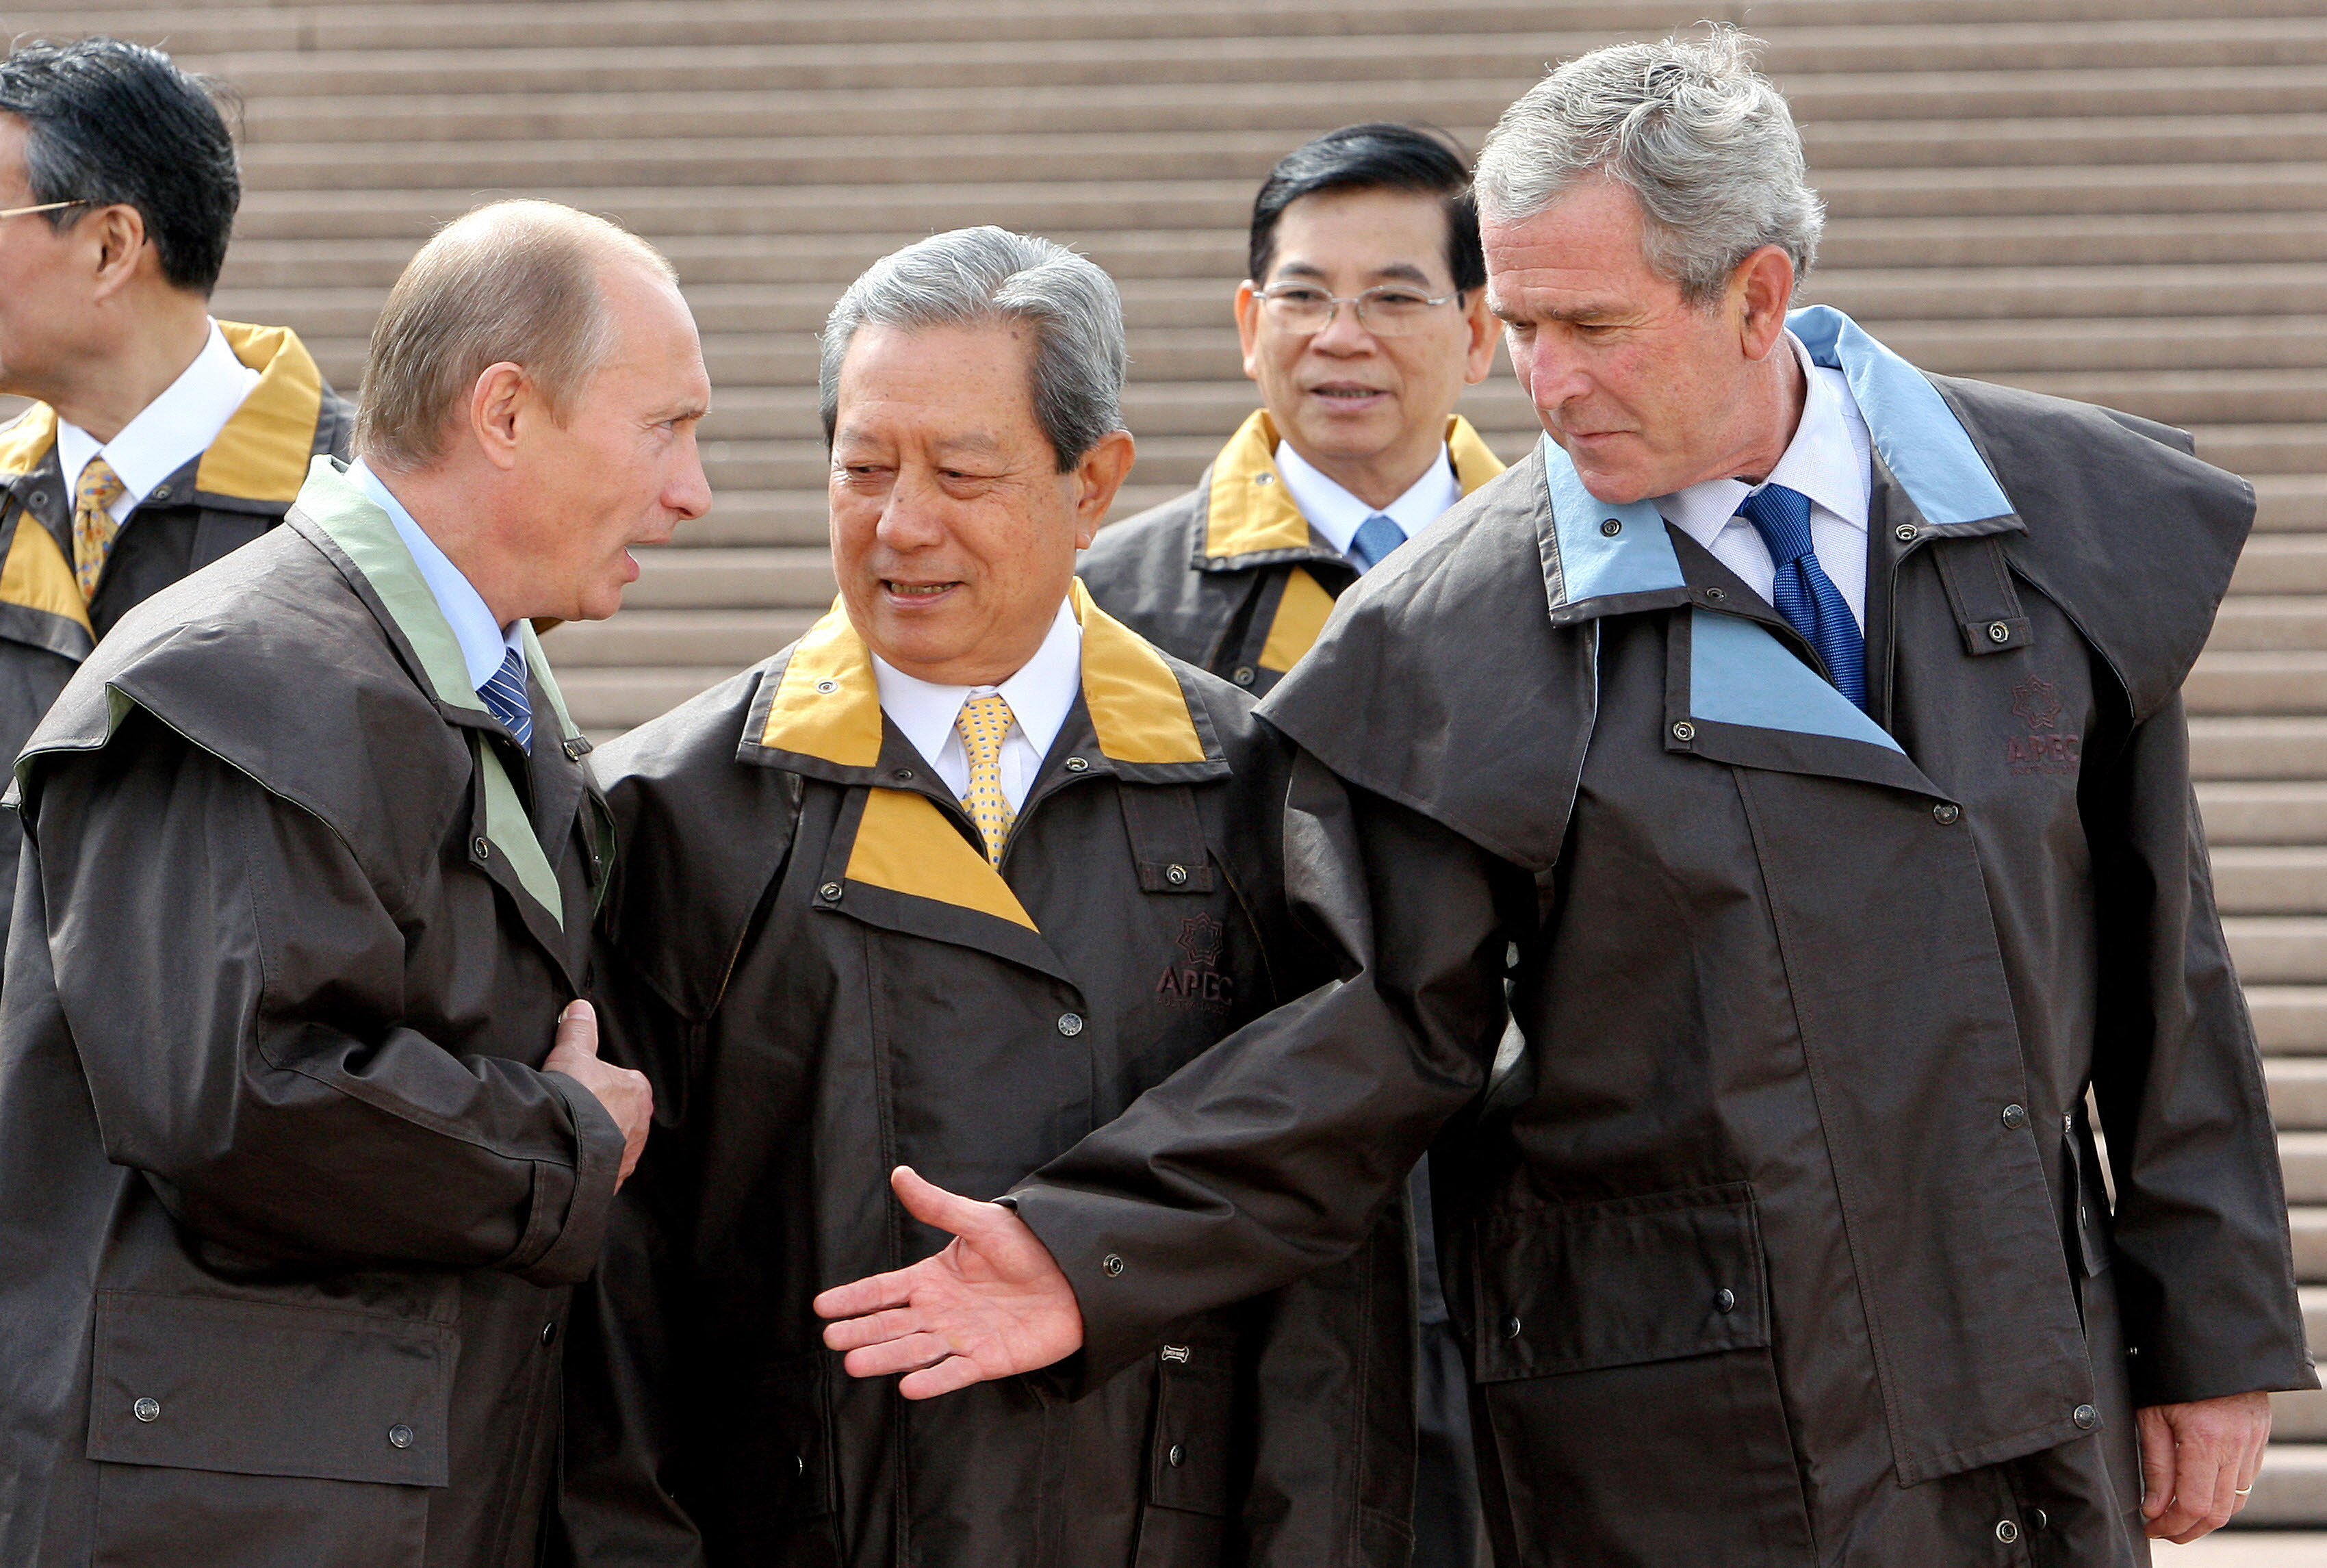 US President George W. Bush greets Russia's President Vladimir Putin while wearing matching raincoats as they wait to take a group picture in Australia.